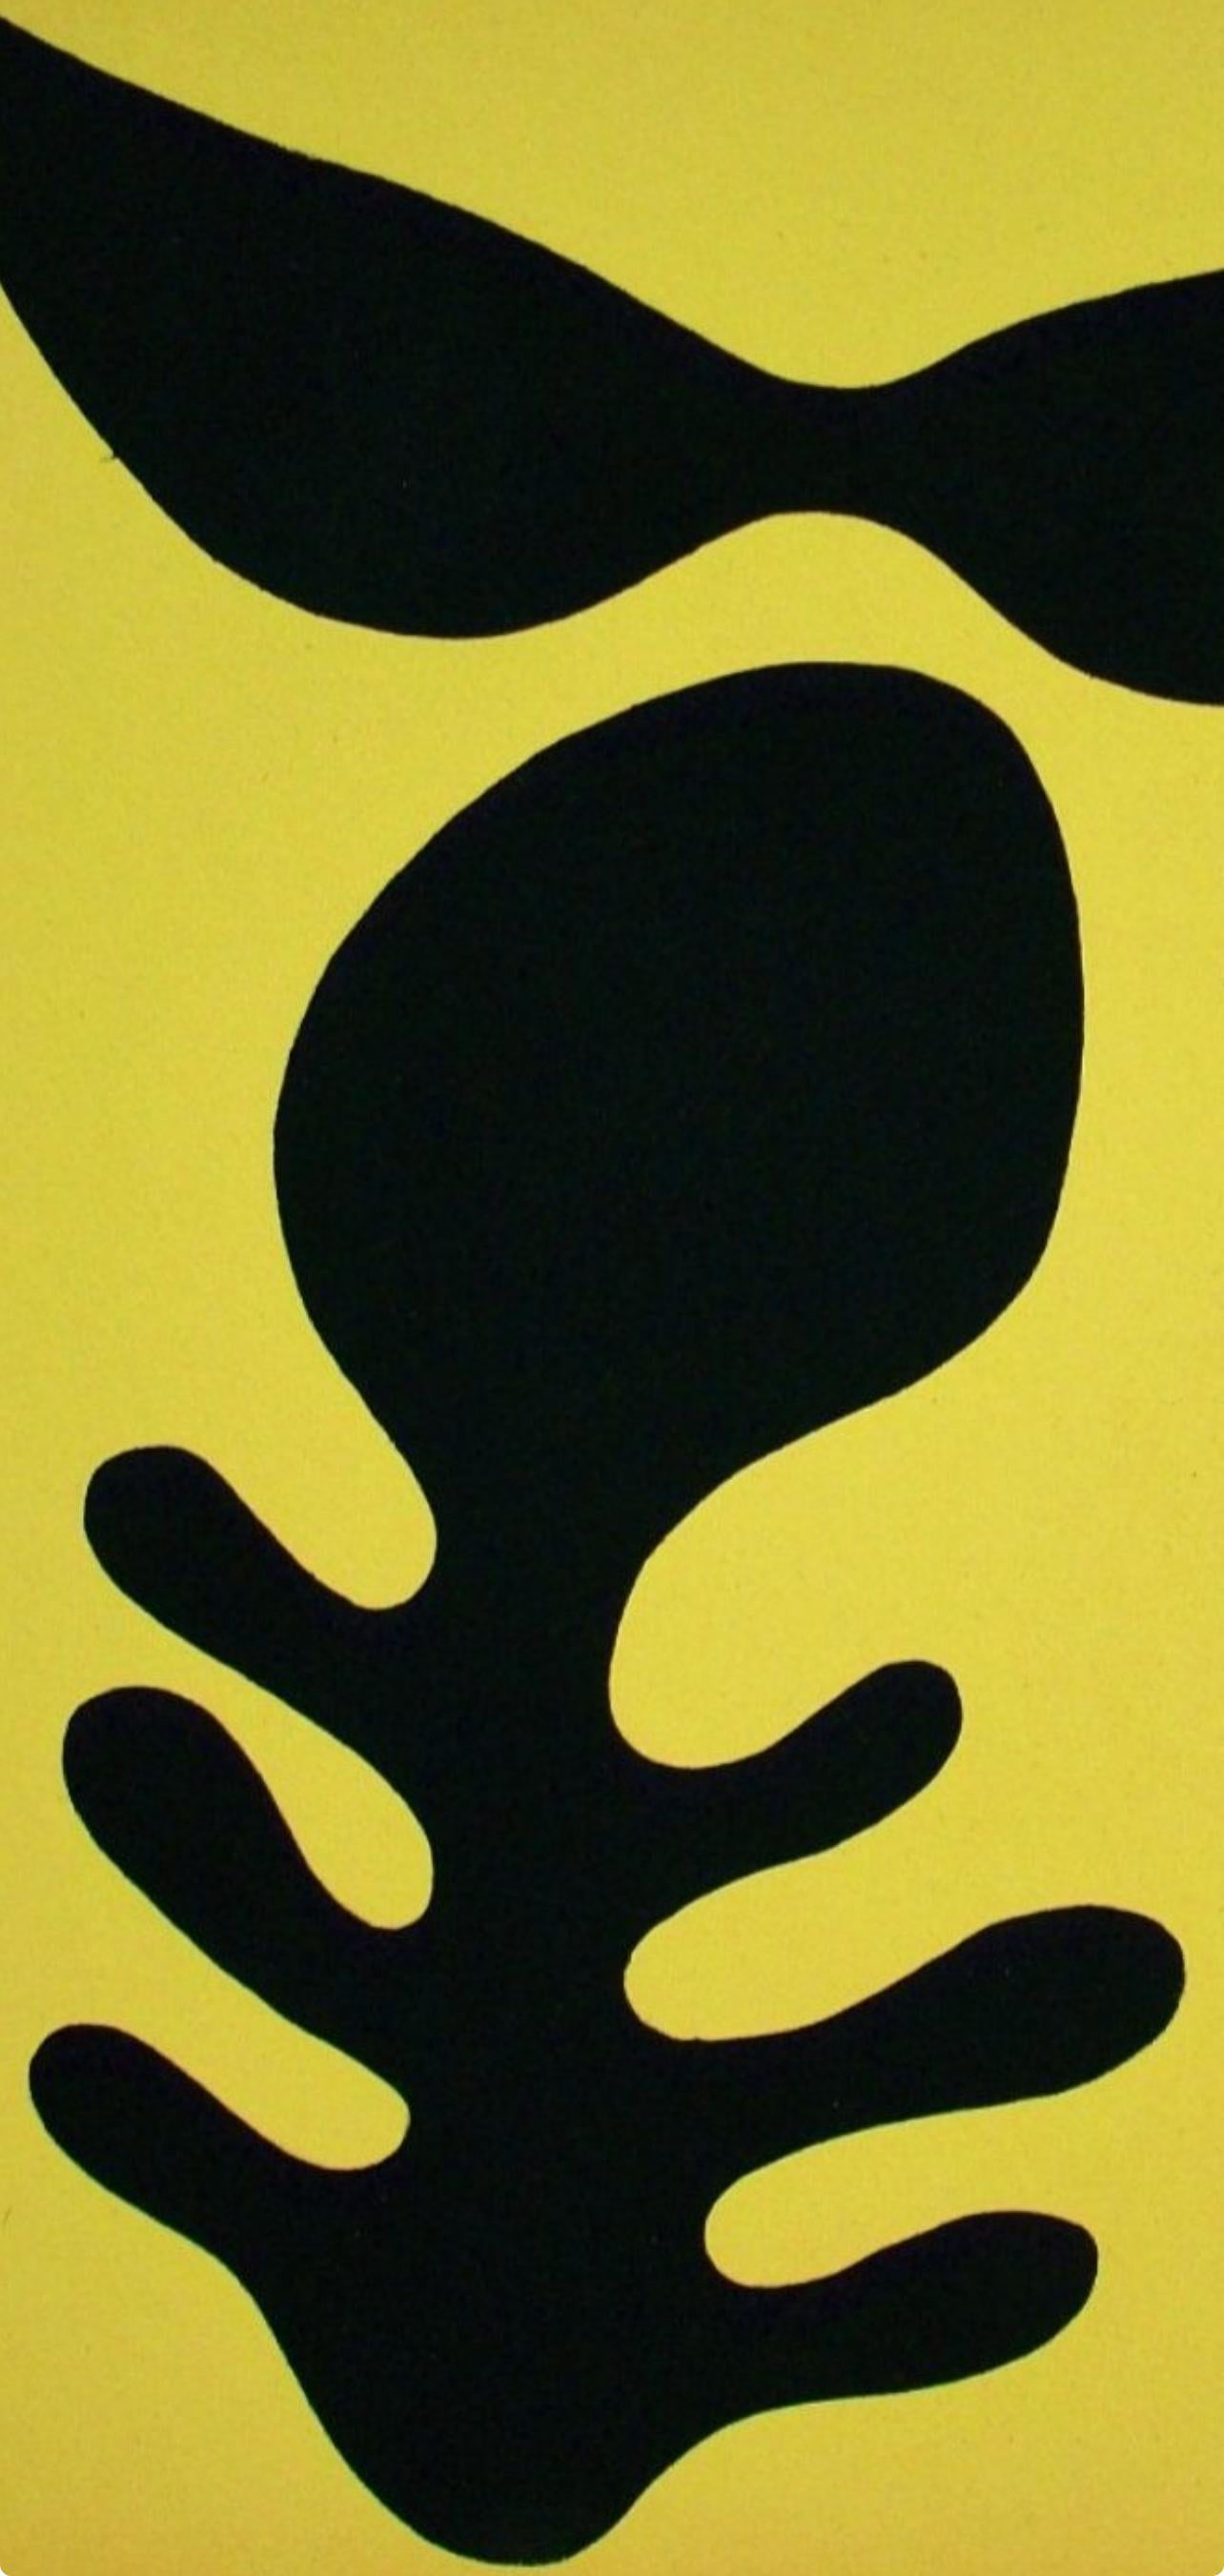 Arp, Mustache and skeleton, XXe Siècle (after) - Print by Jean Arp